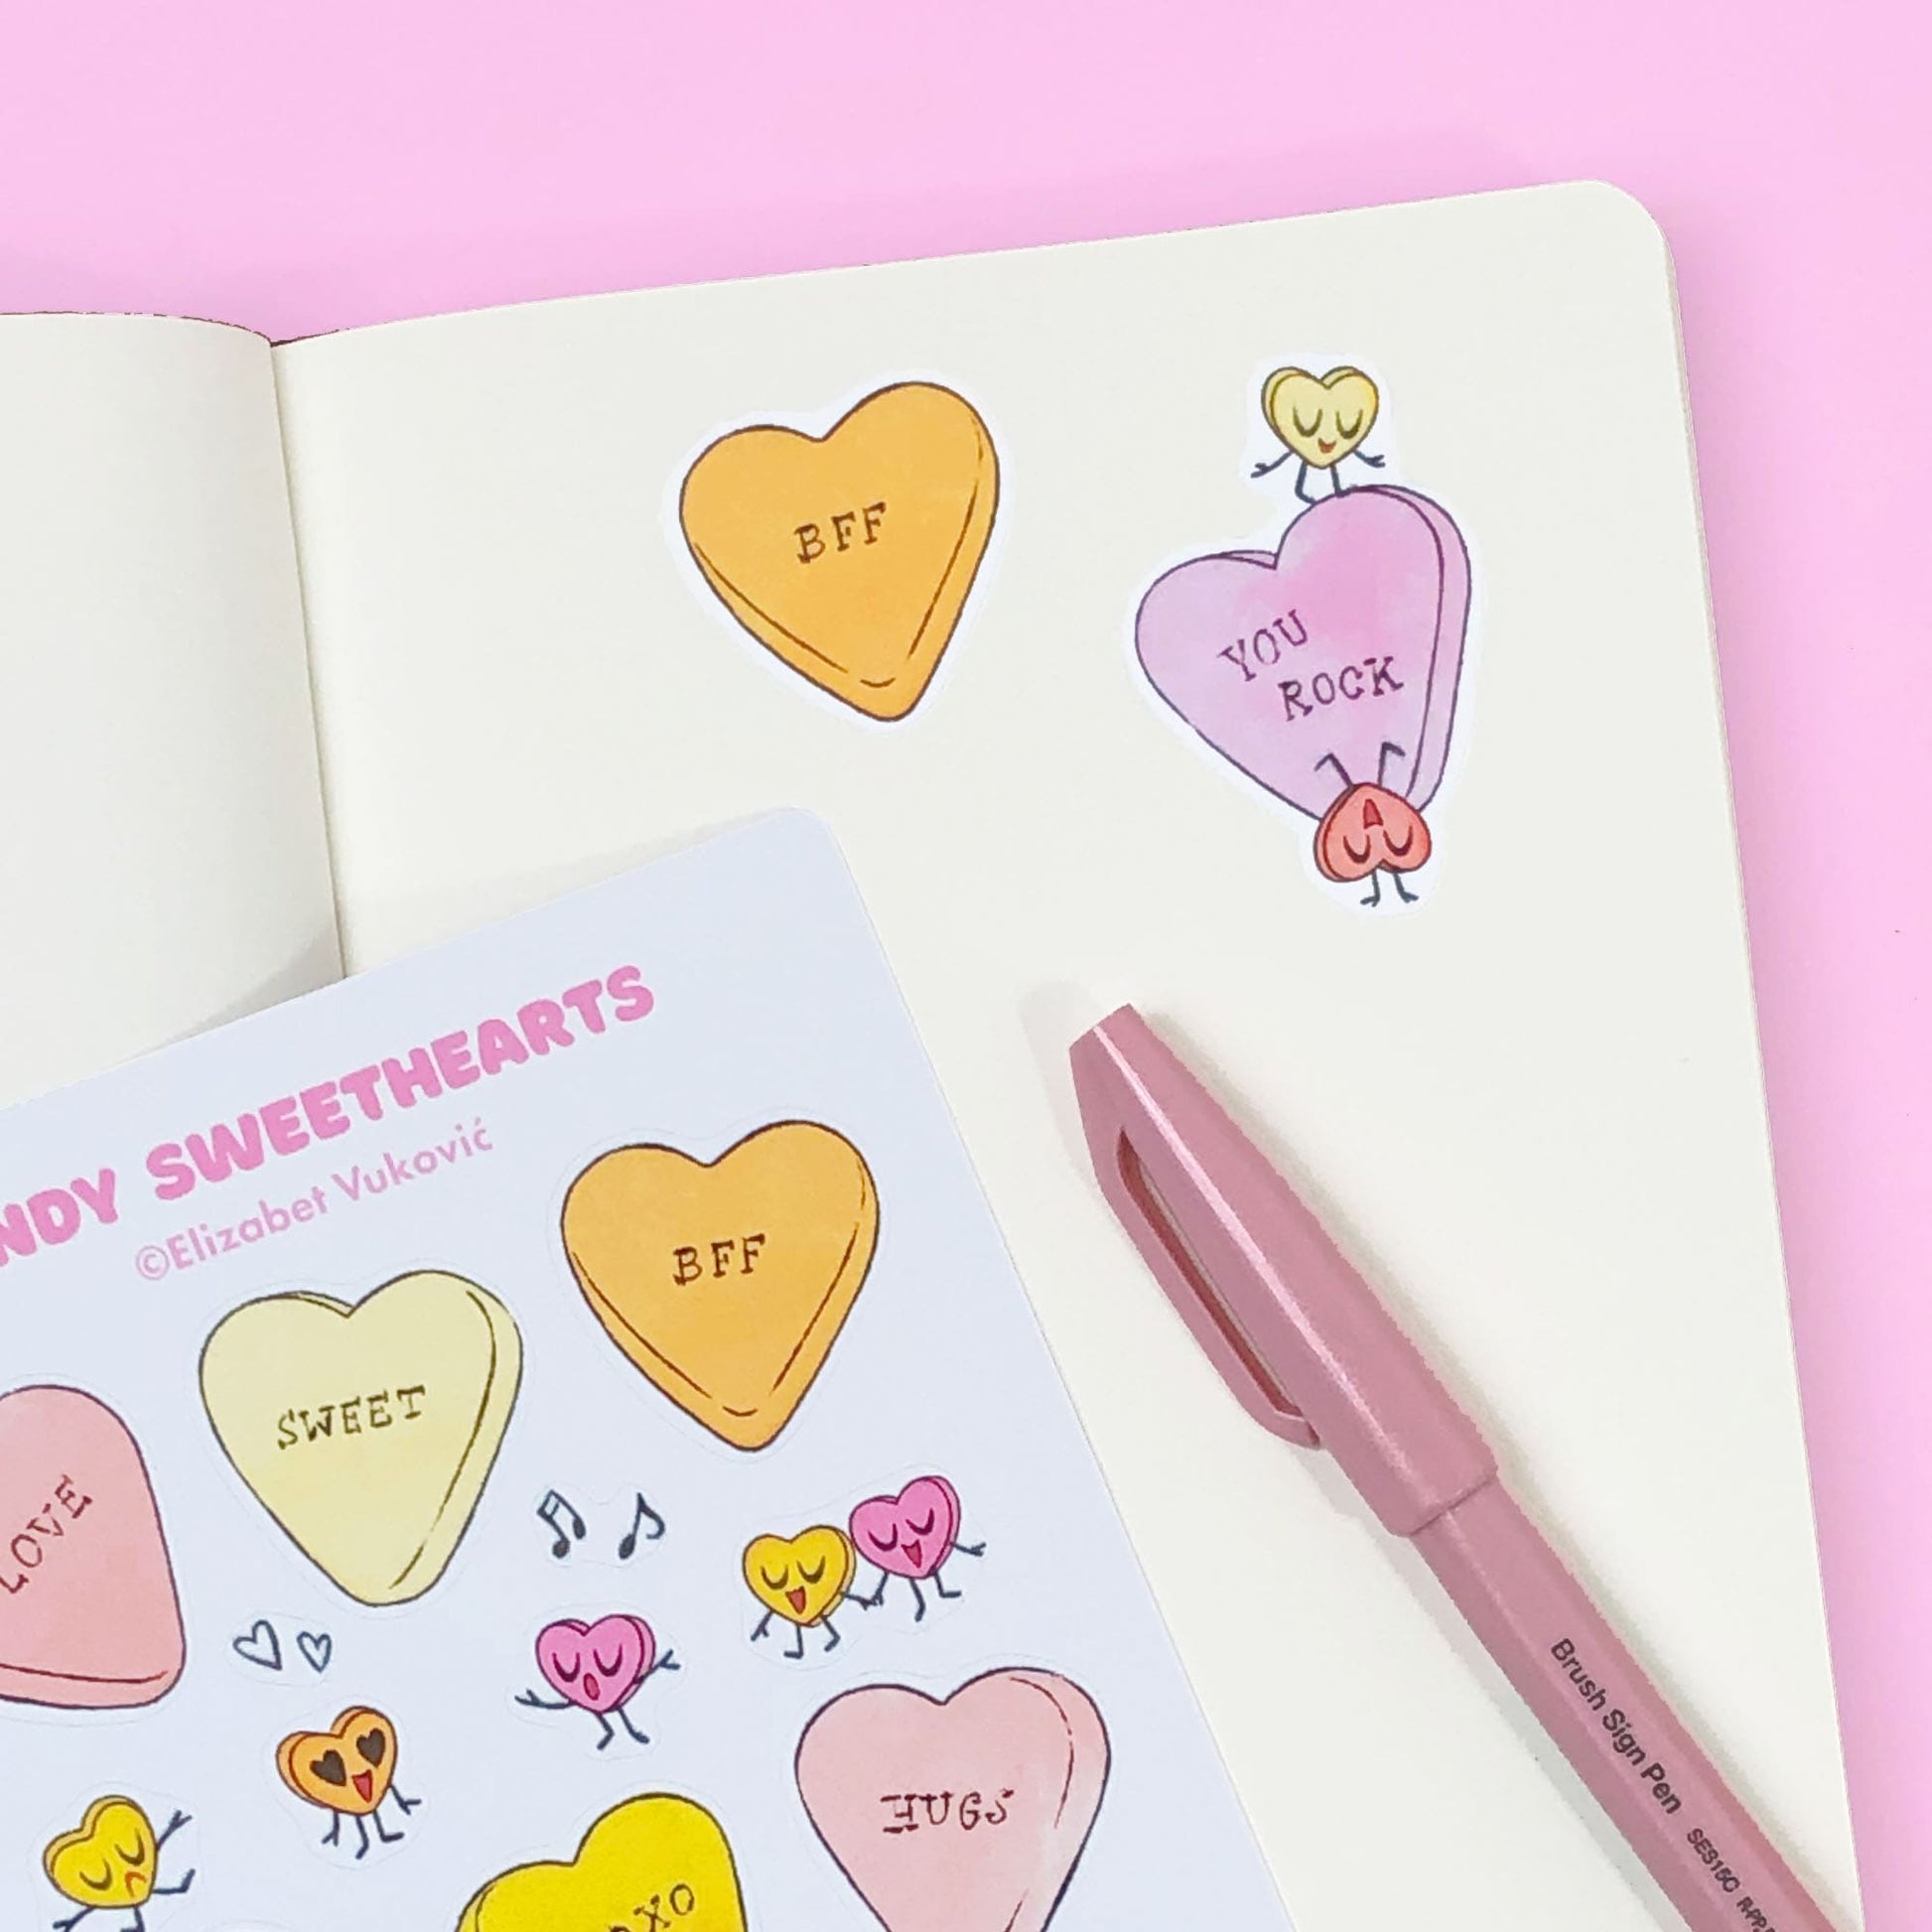 Cute candy heart conversation stickers on a journal page.